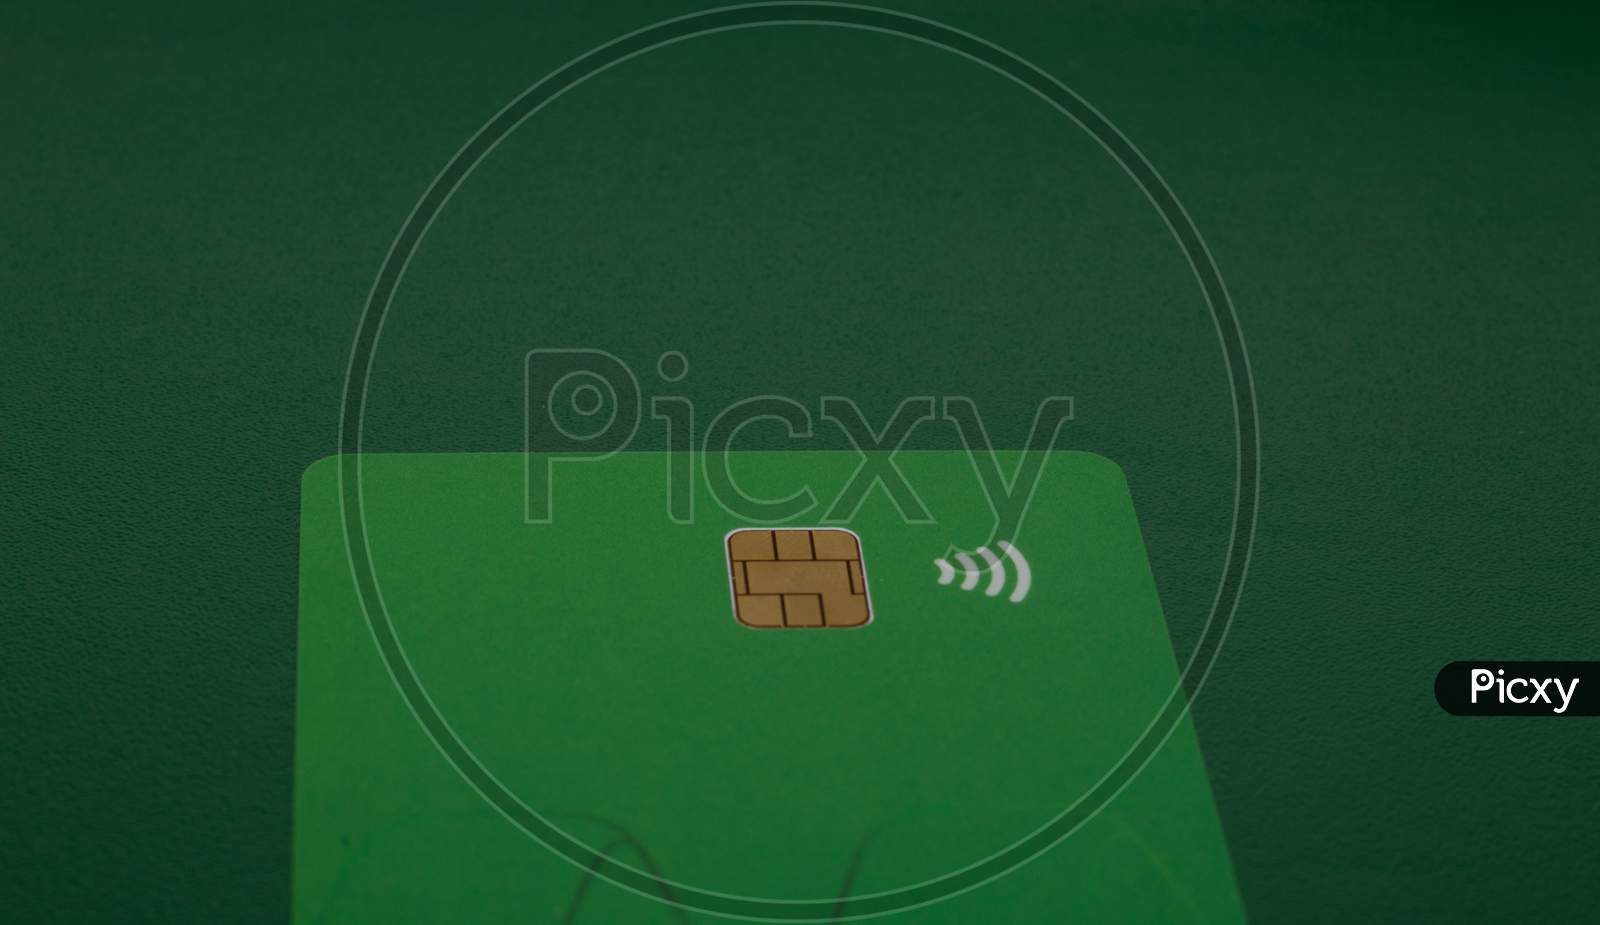 Blank Card With Brown Square Chip Symbol And A Wifi Symbol Concept Of Contactless Payment As New Normal After Coronavirus Pandemic Outbreak